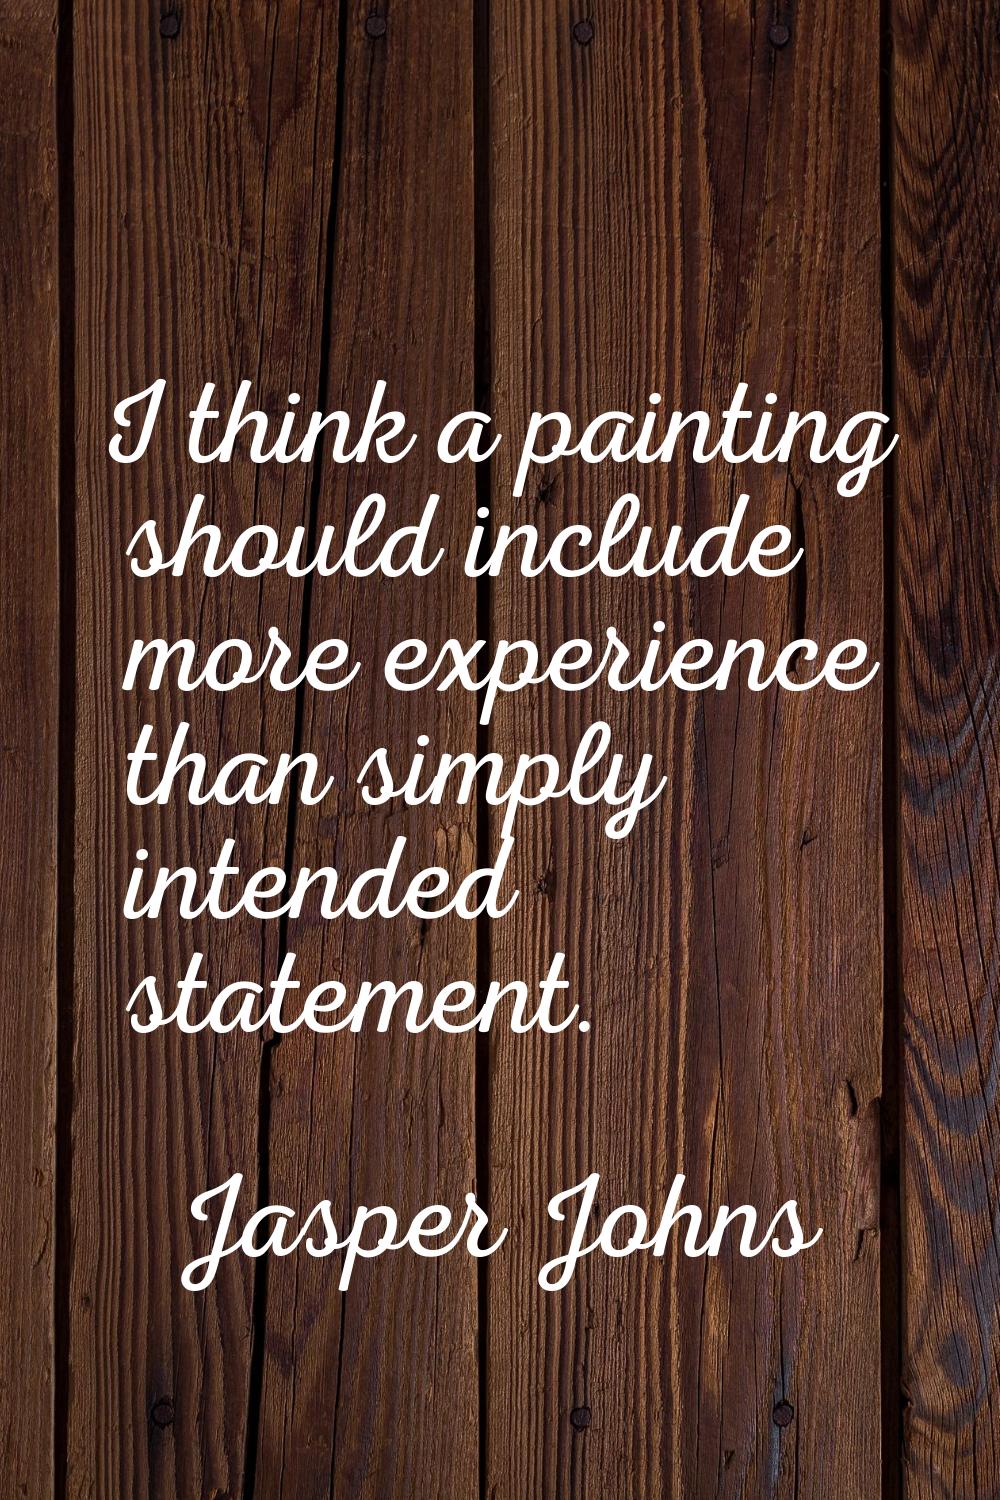 I think a painting should include more experience than simply intended statement.